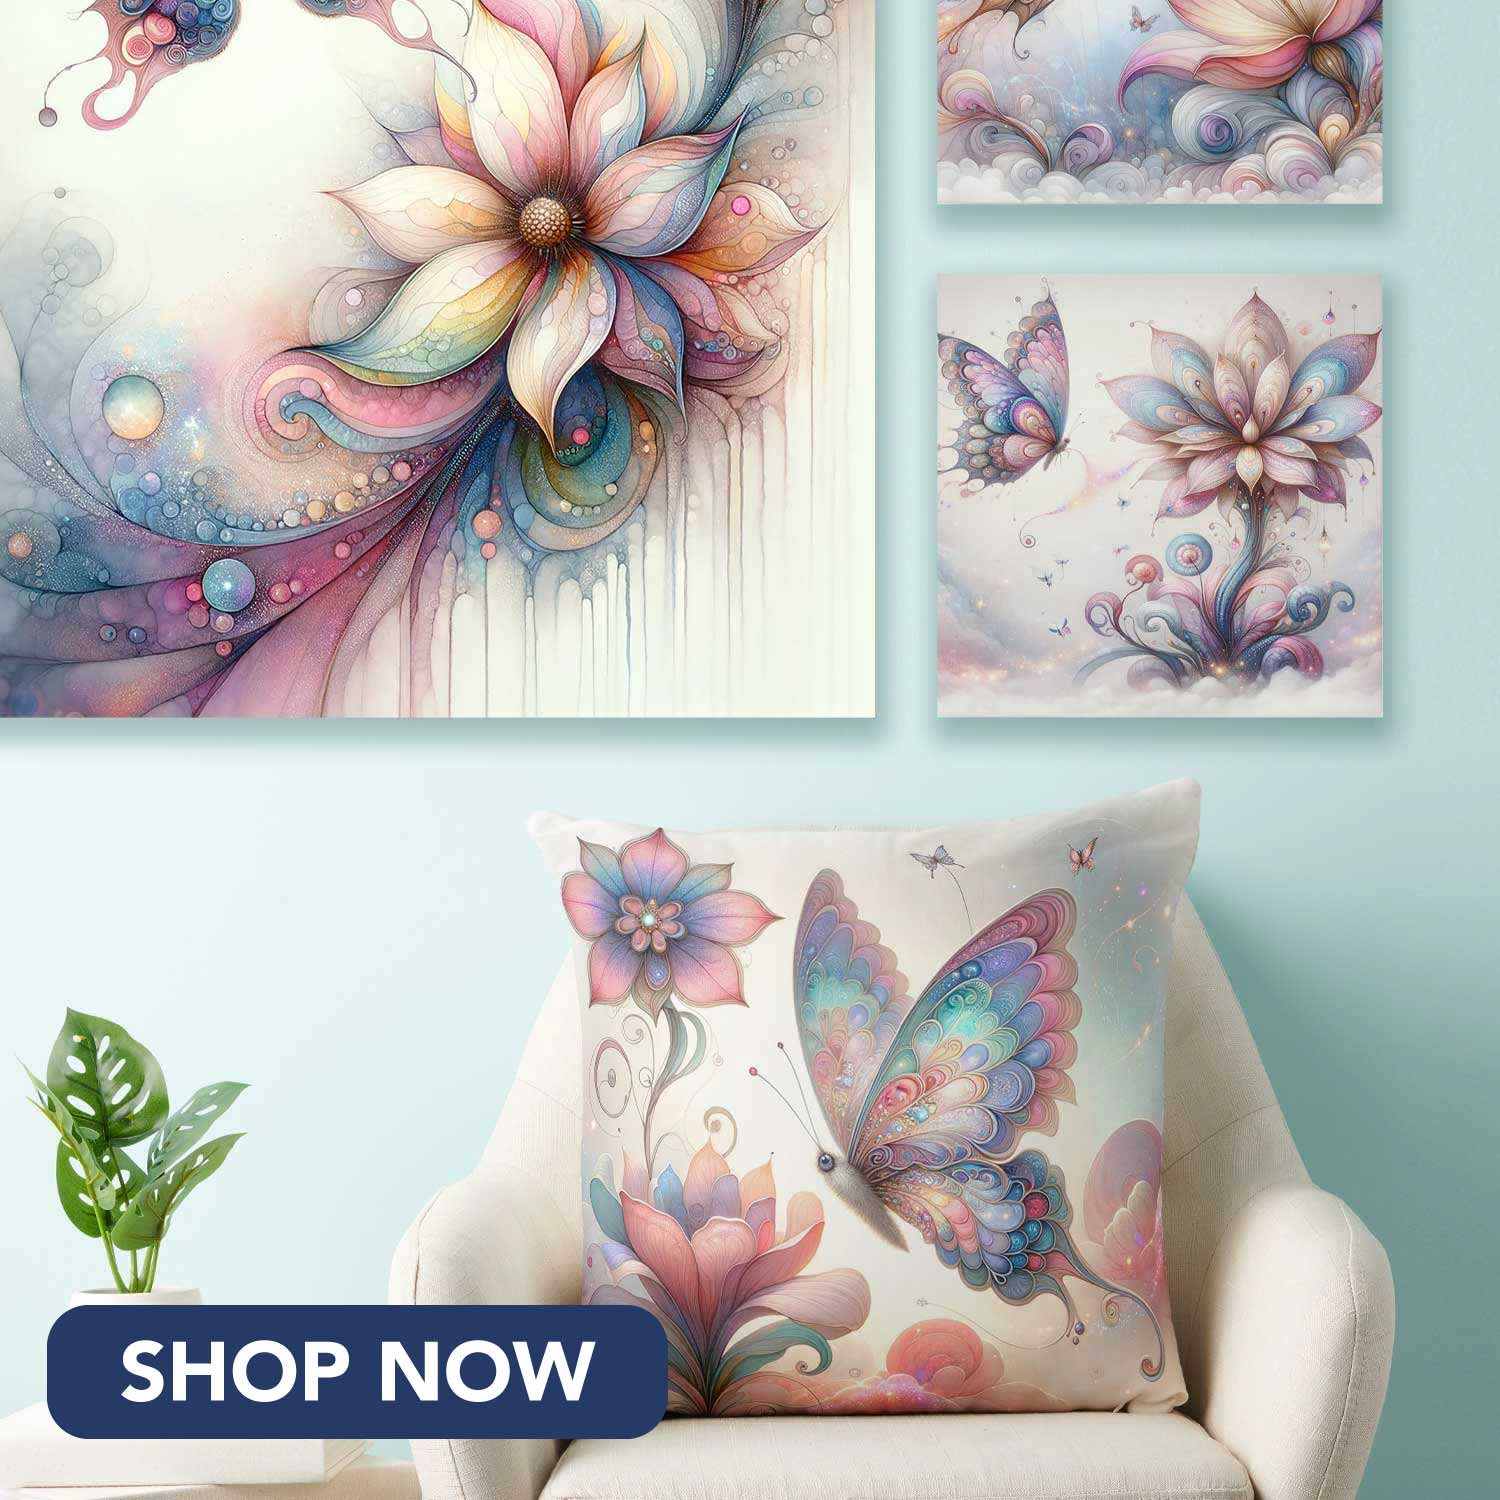 Mystical butterfly bedroom decor for girls.